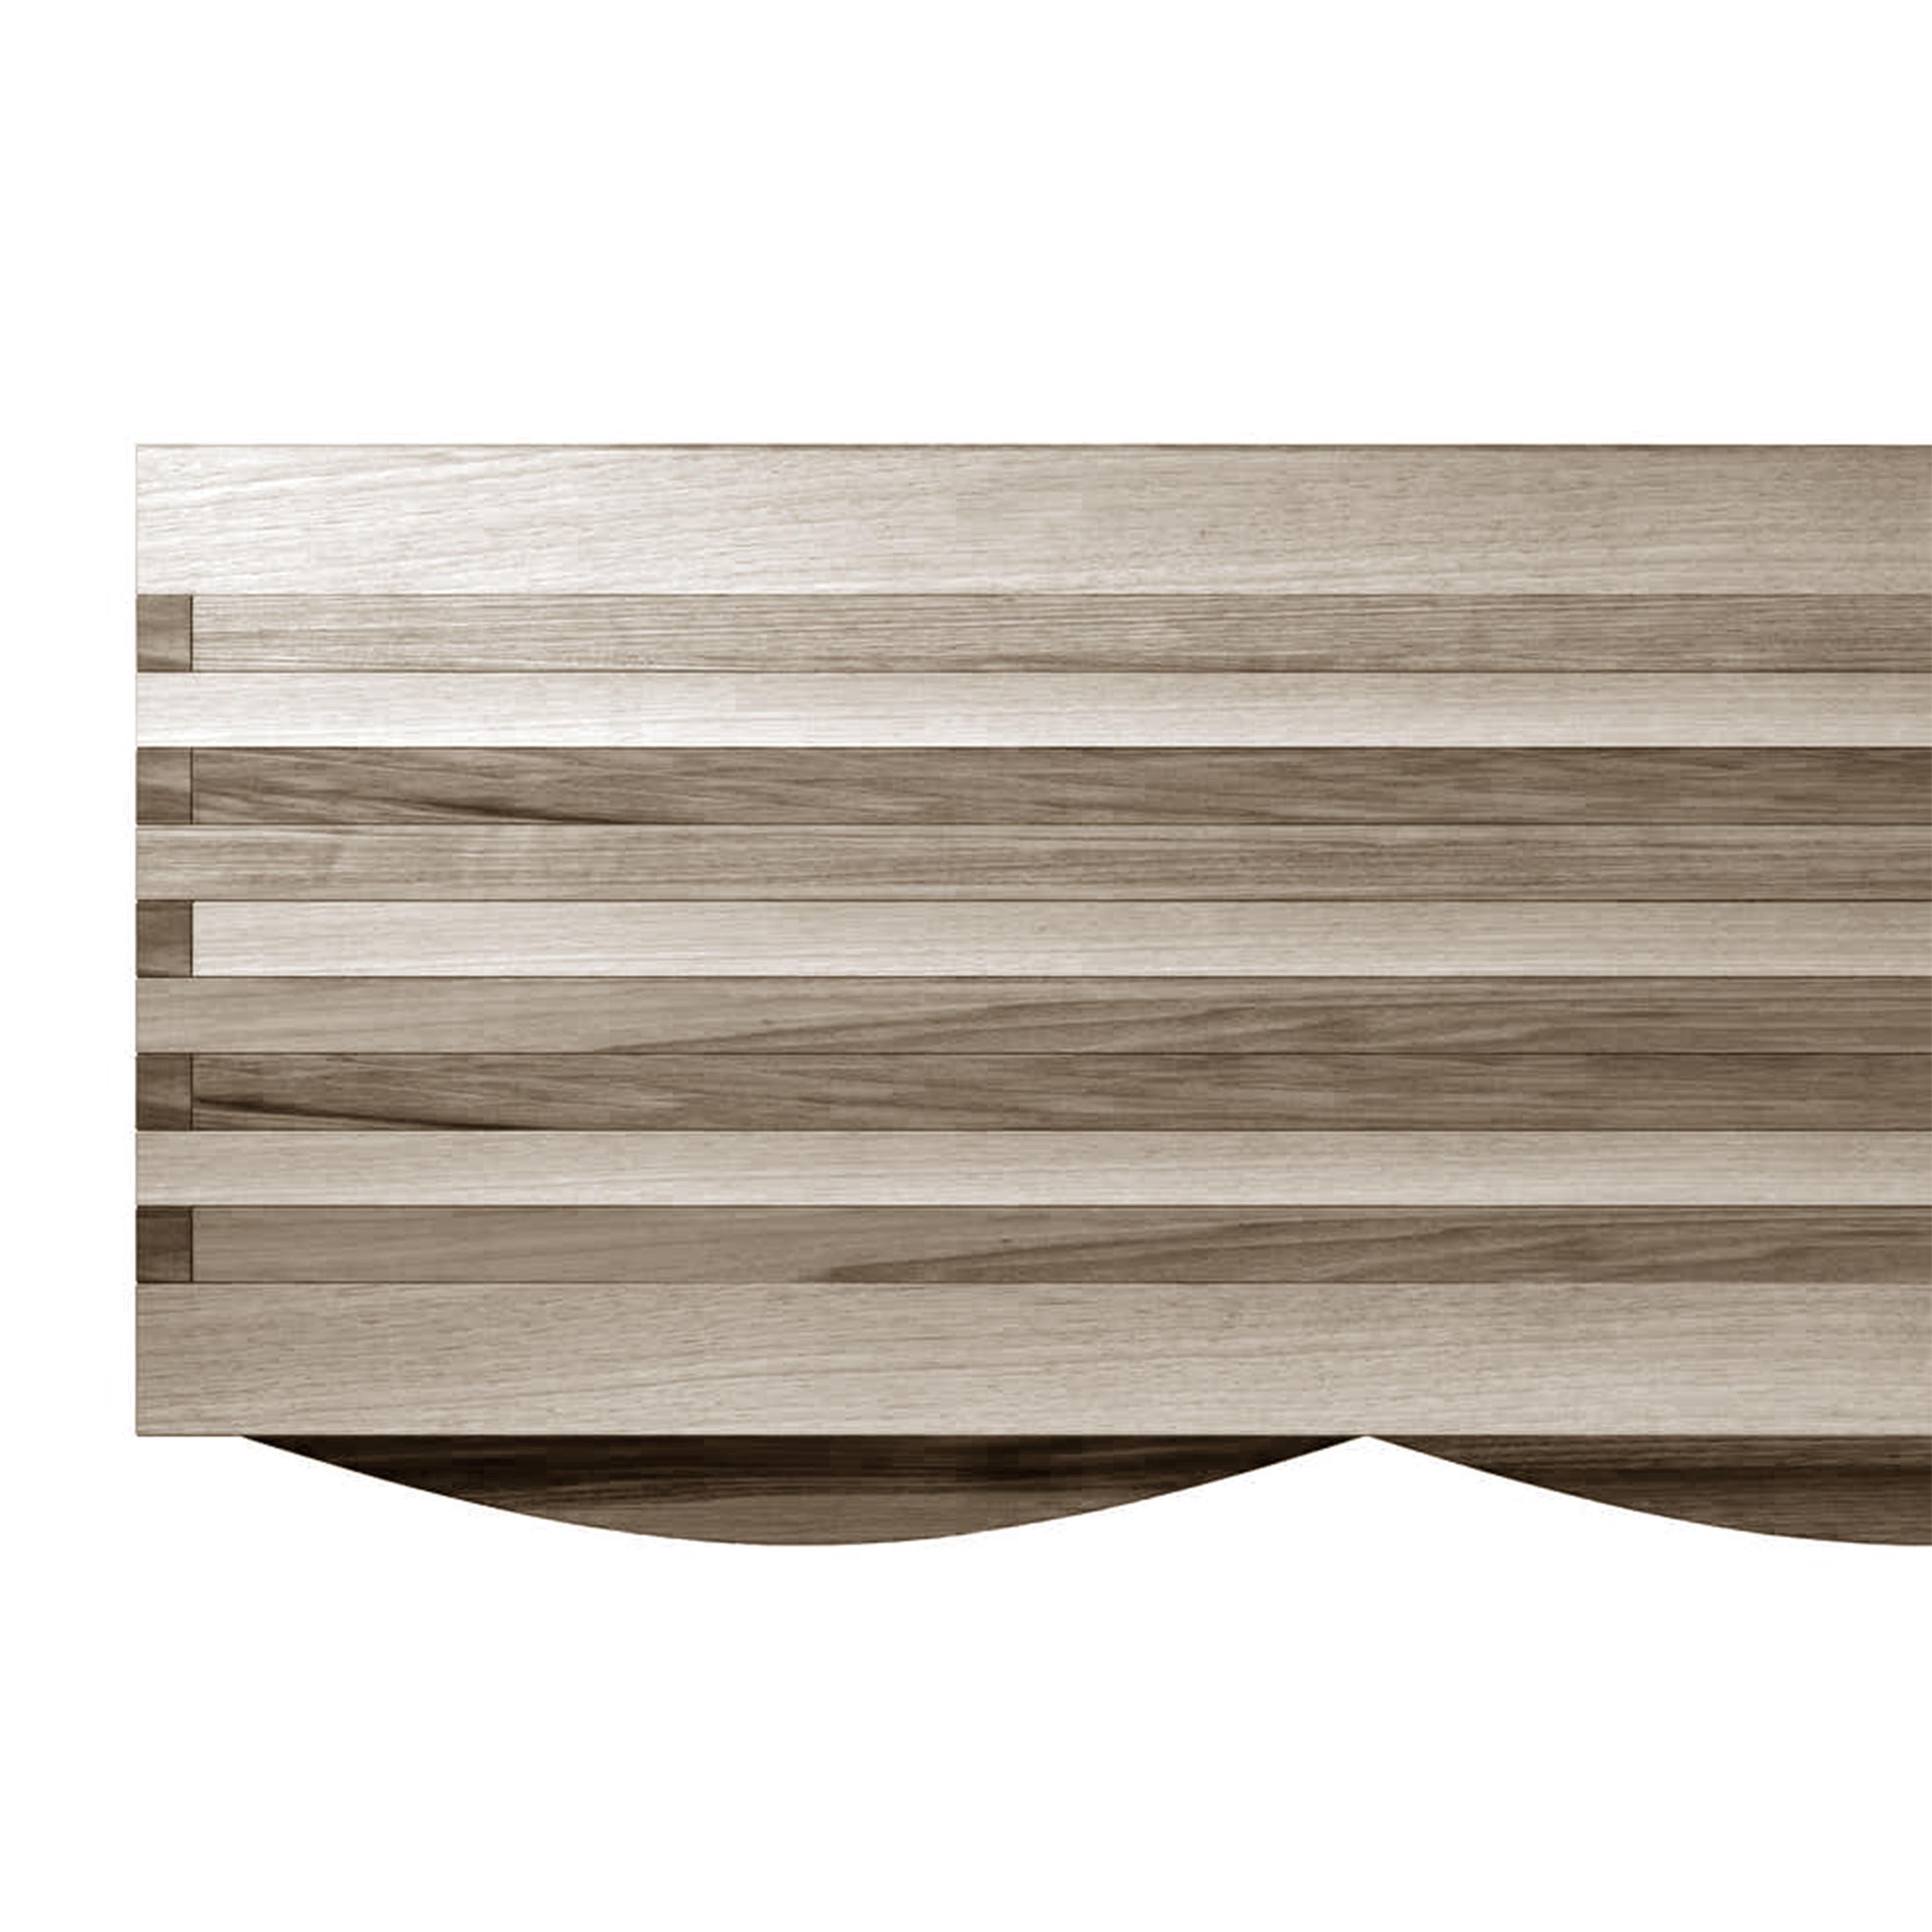 Italian Onda Solid Wood Sideboard, Walnut in Hand-Made Natural Grey Finish, Contemporary For Sale